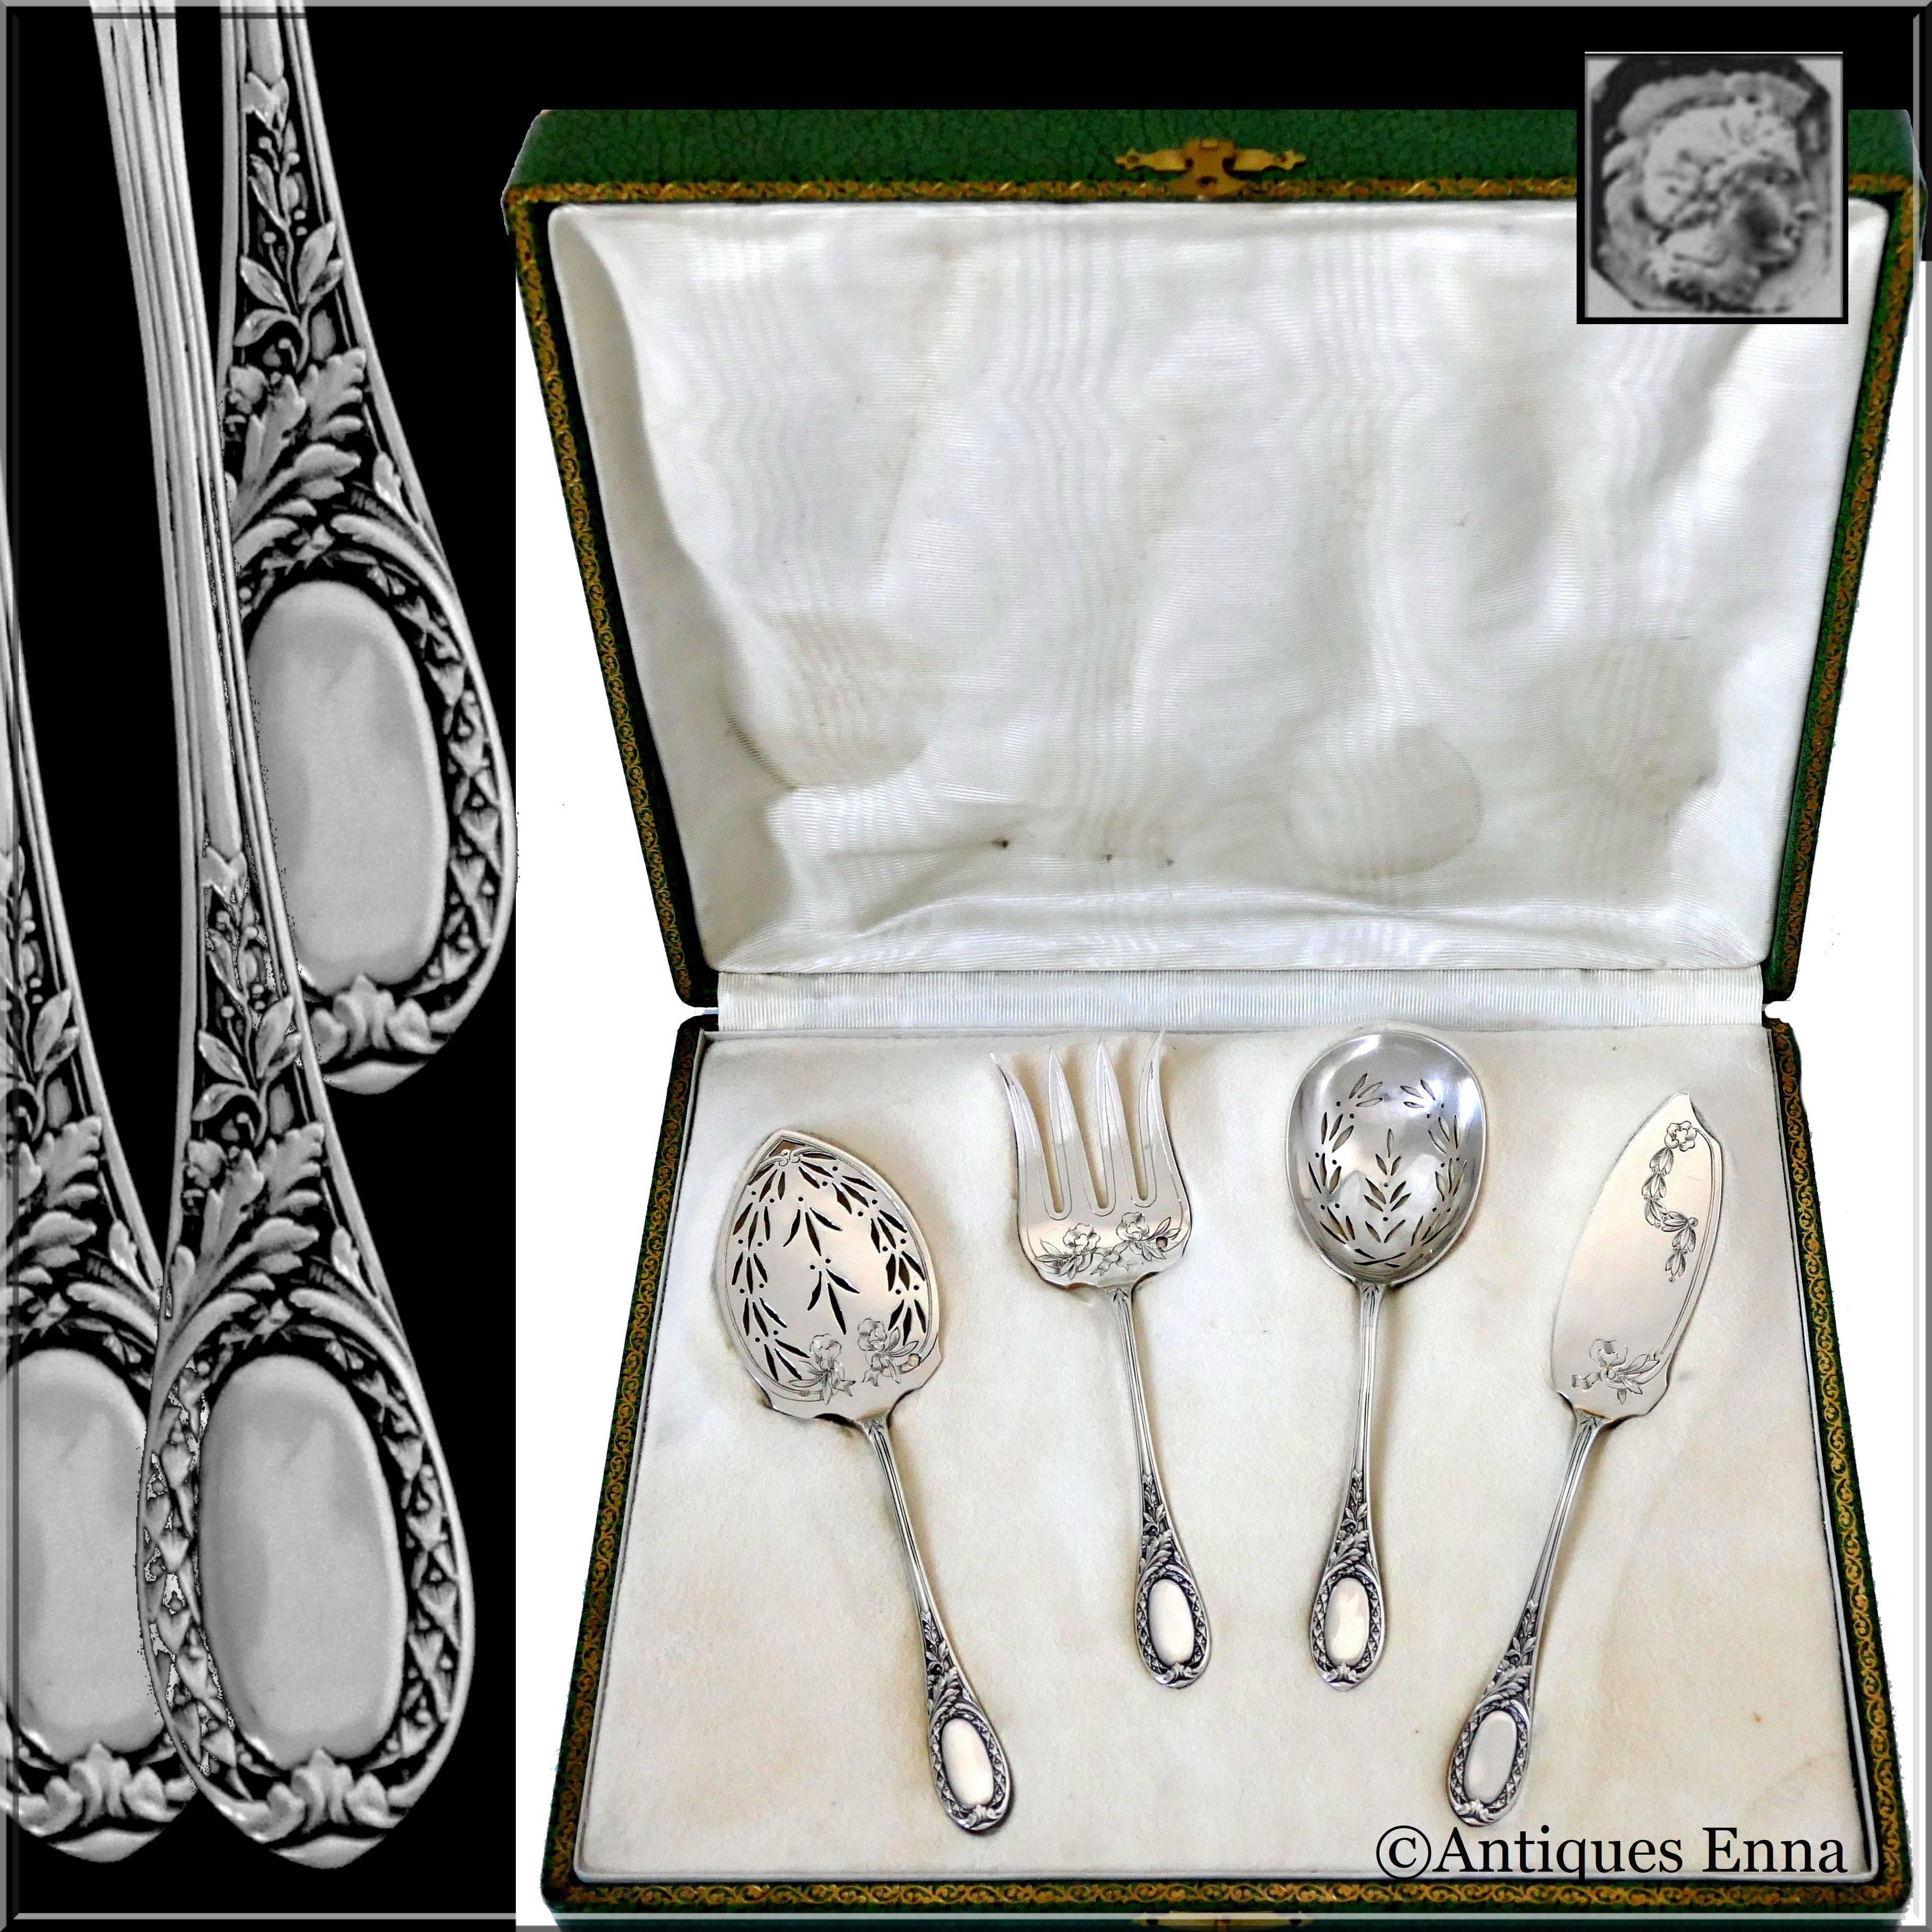 Head of Minerve first titre for 950/1000 French sterling silver guarantee.

The set includes a server, a fork, a spoon and a knife. It can be used for dessert as for Hors d'oeuvre. The spatulas are decorated in a neoclassical, Louis XVI style with